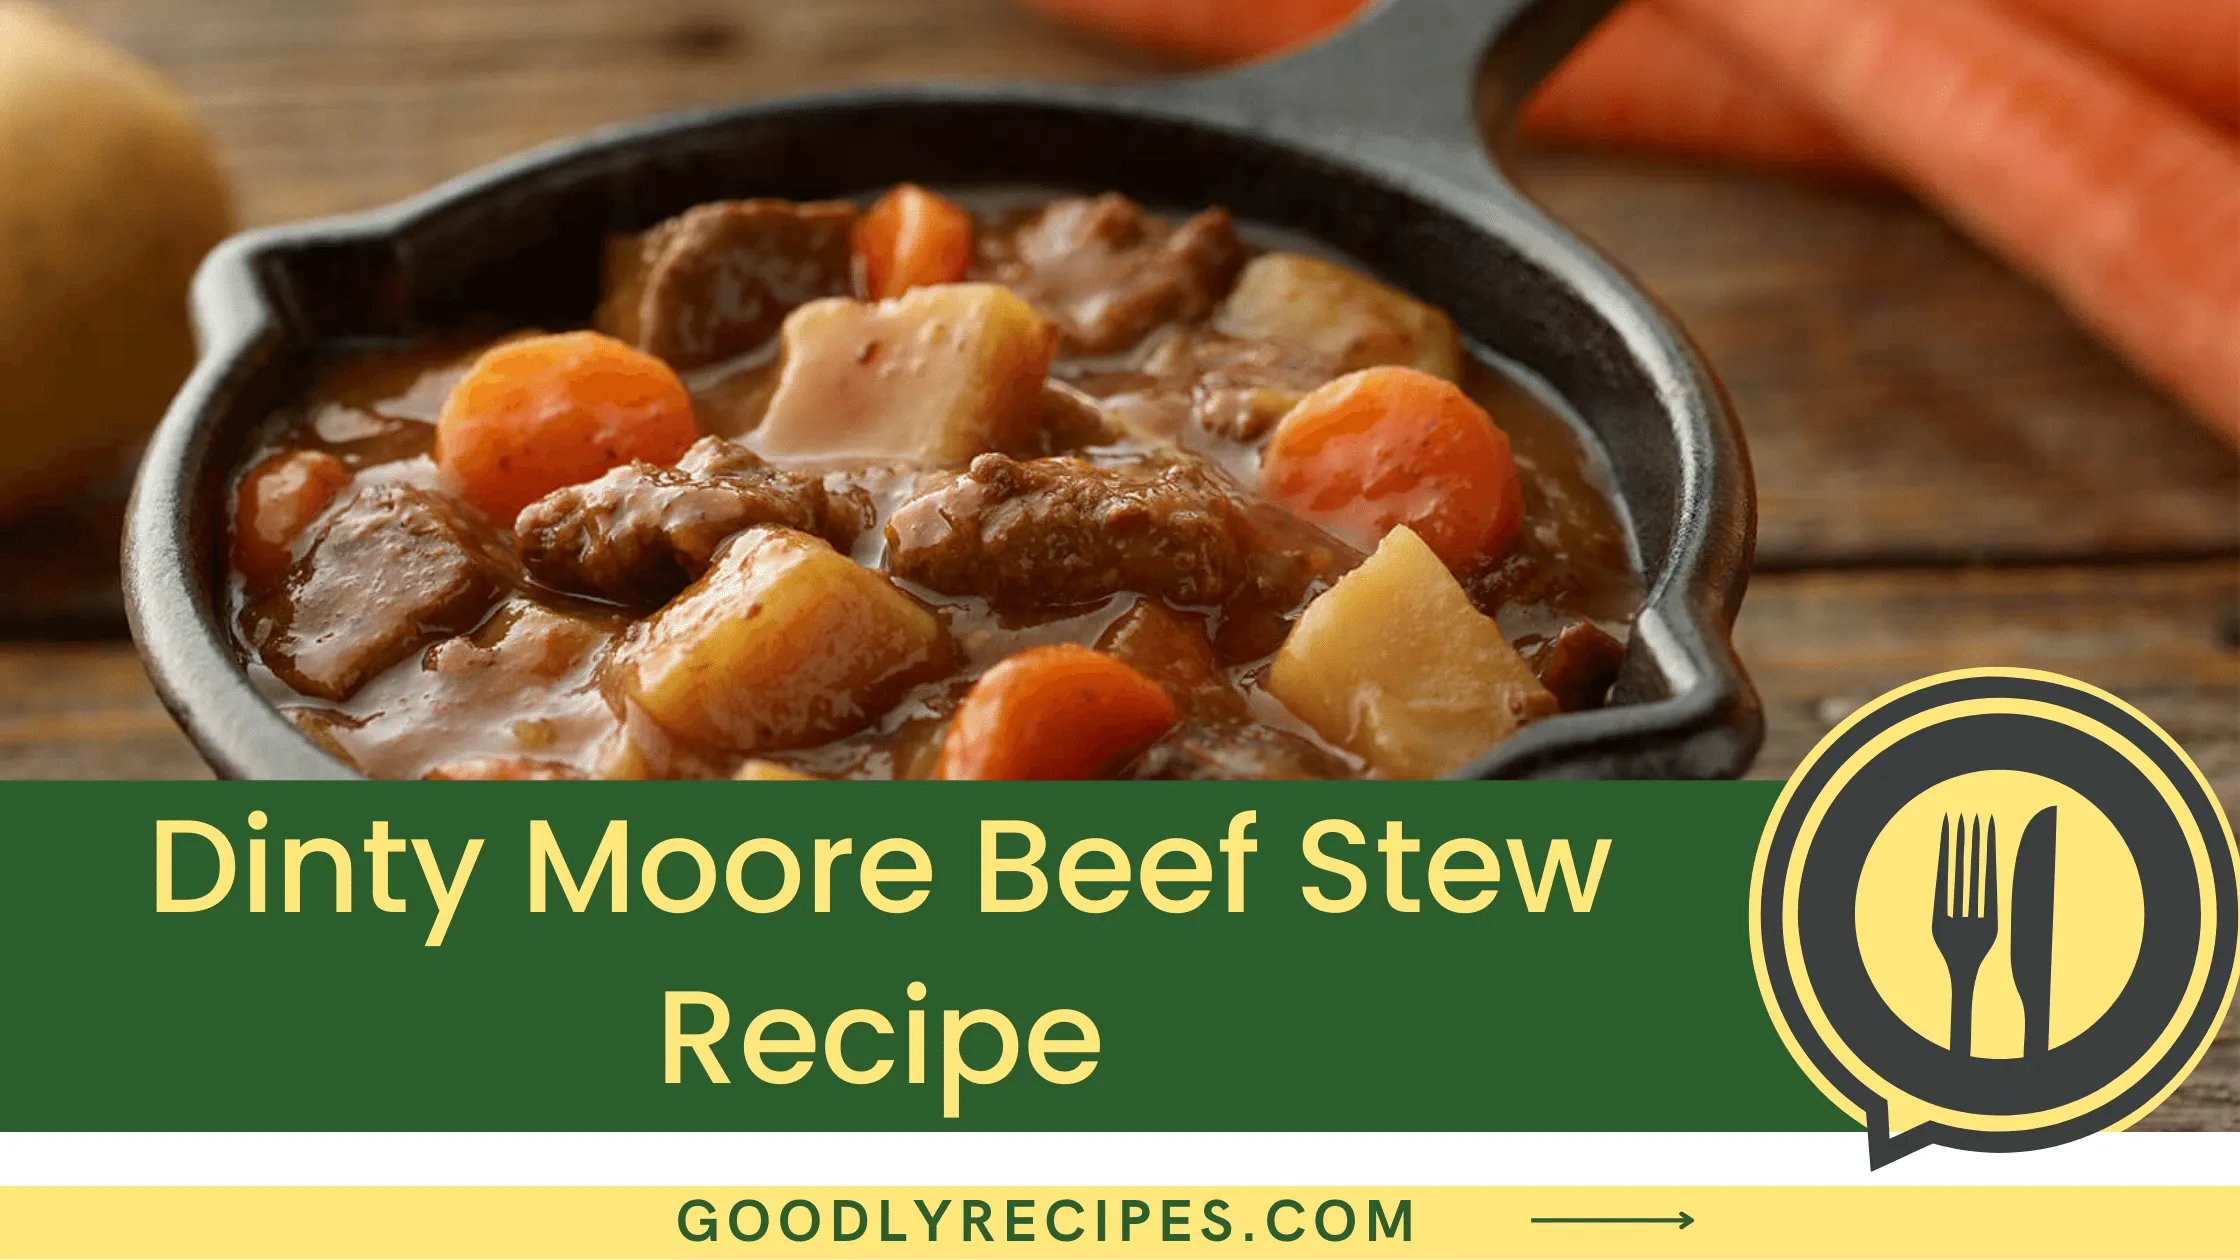 Dinty Moore Beef Stew Recipe - For Food Lovers